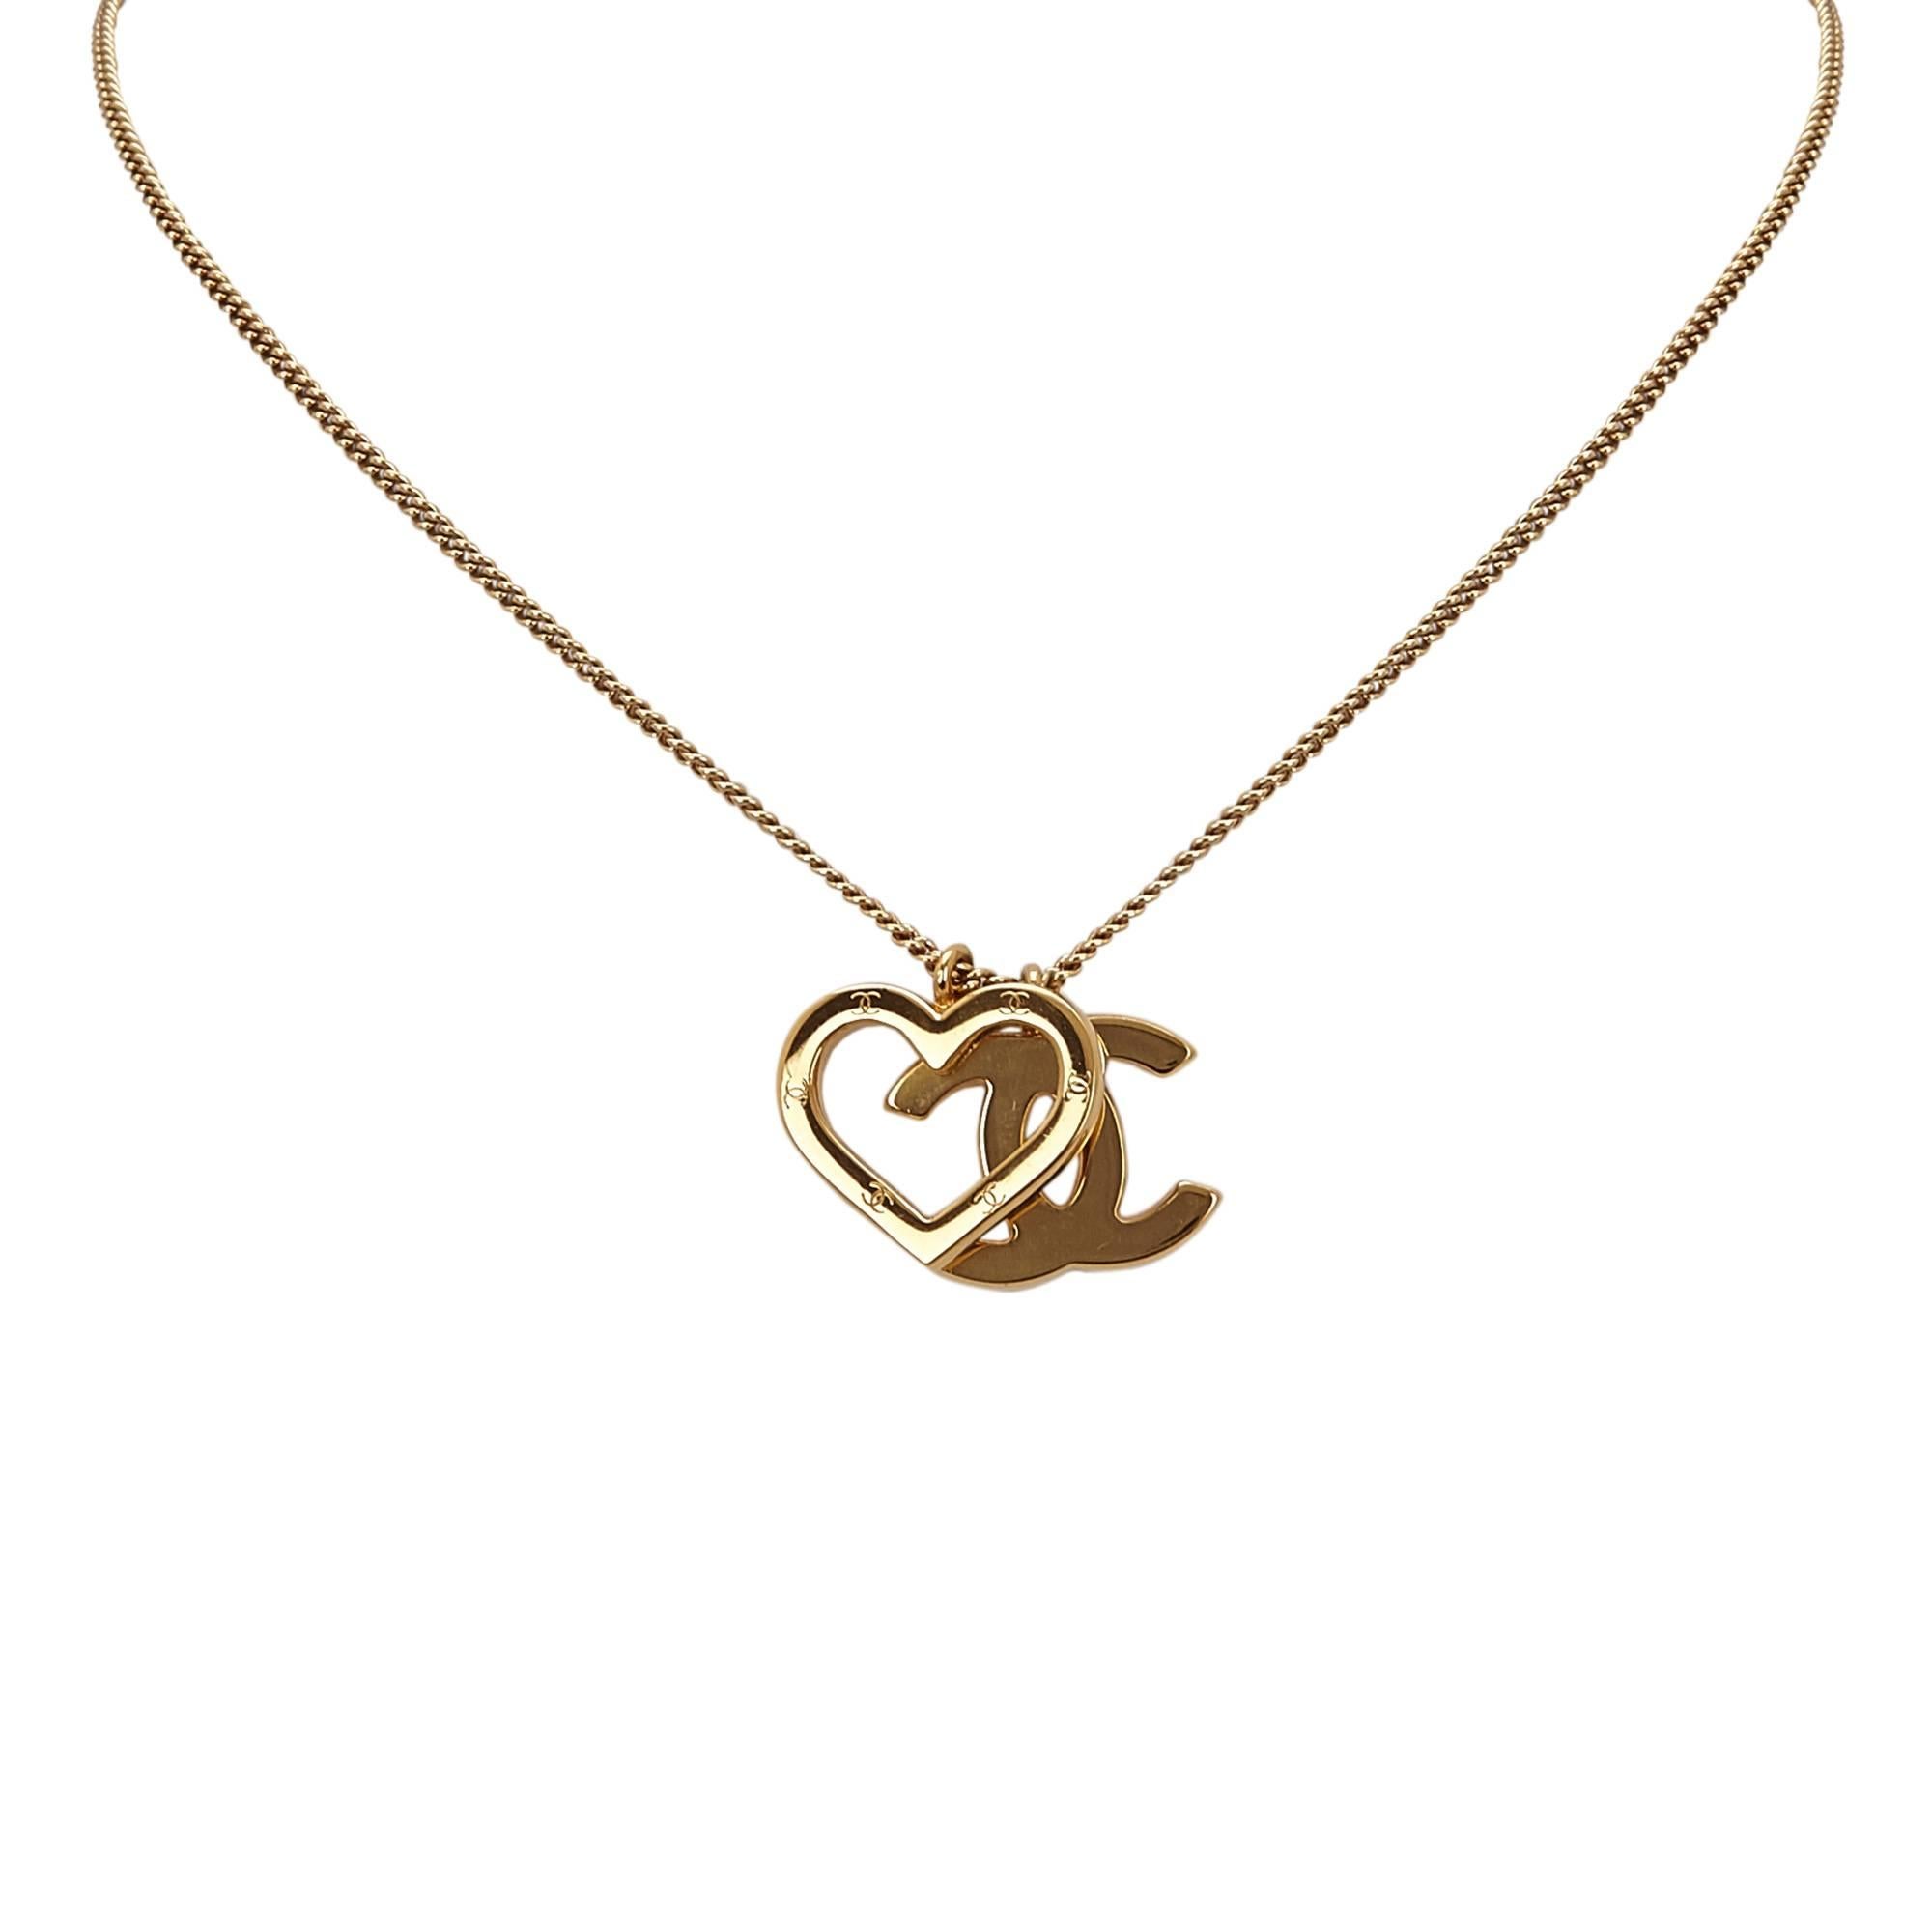 - This 2004 Chanel necklace features a gold-tone "CC" and heart pendant with a  springring closure.

- Made in France. 

- Size: 1.9cm x 1.5cm. 

- Circumference 42cm. 

- Include: Box. 

